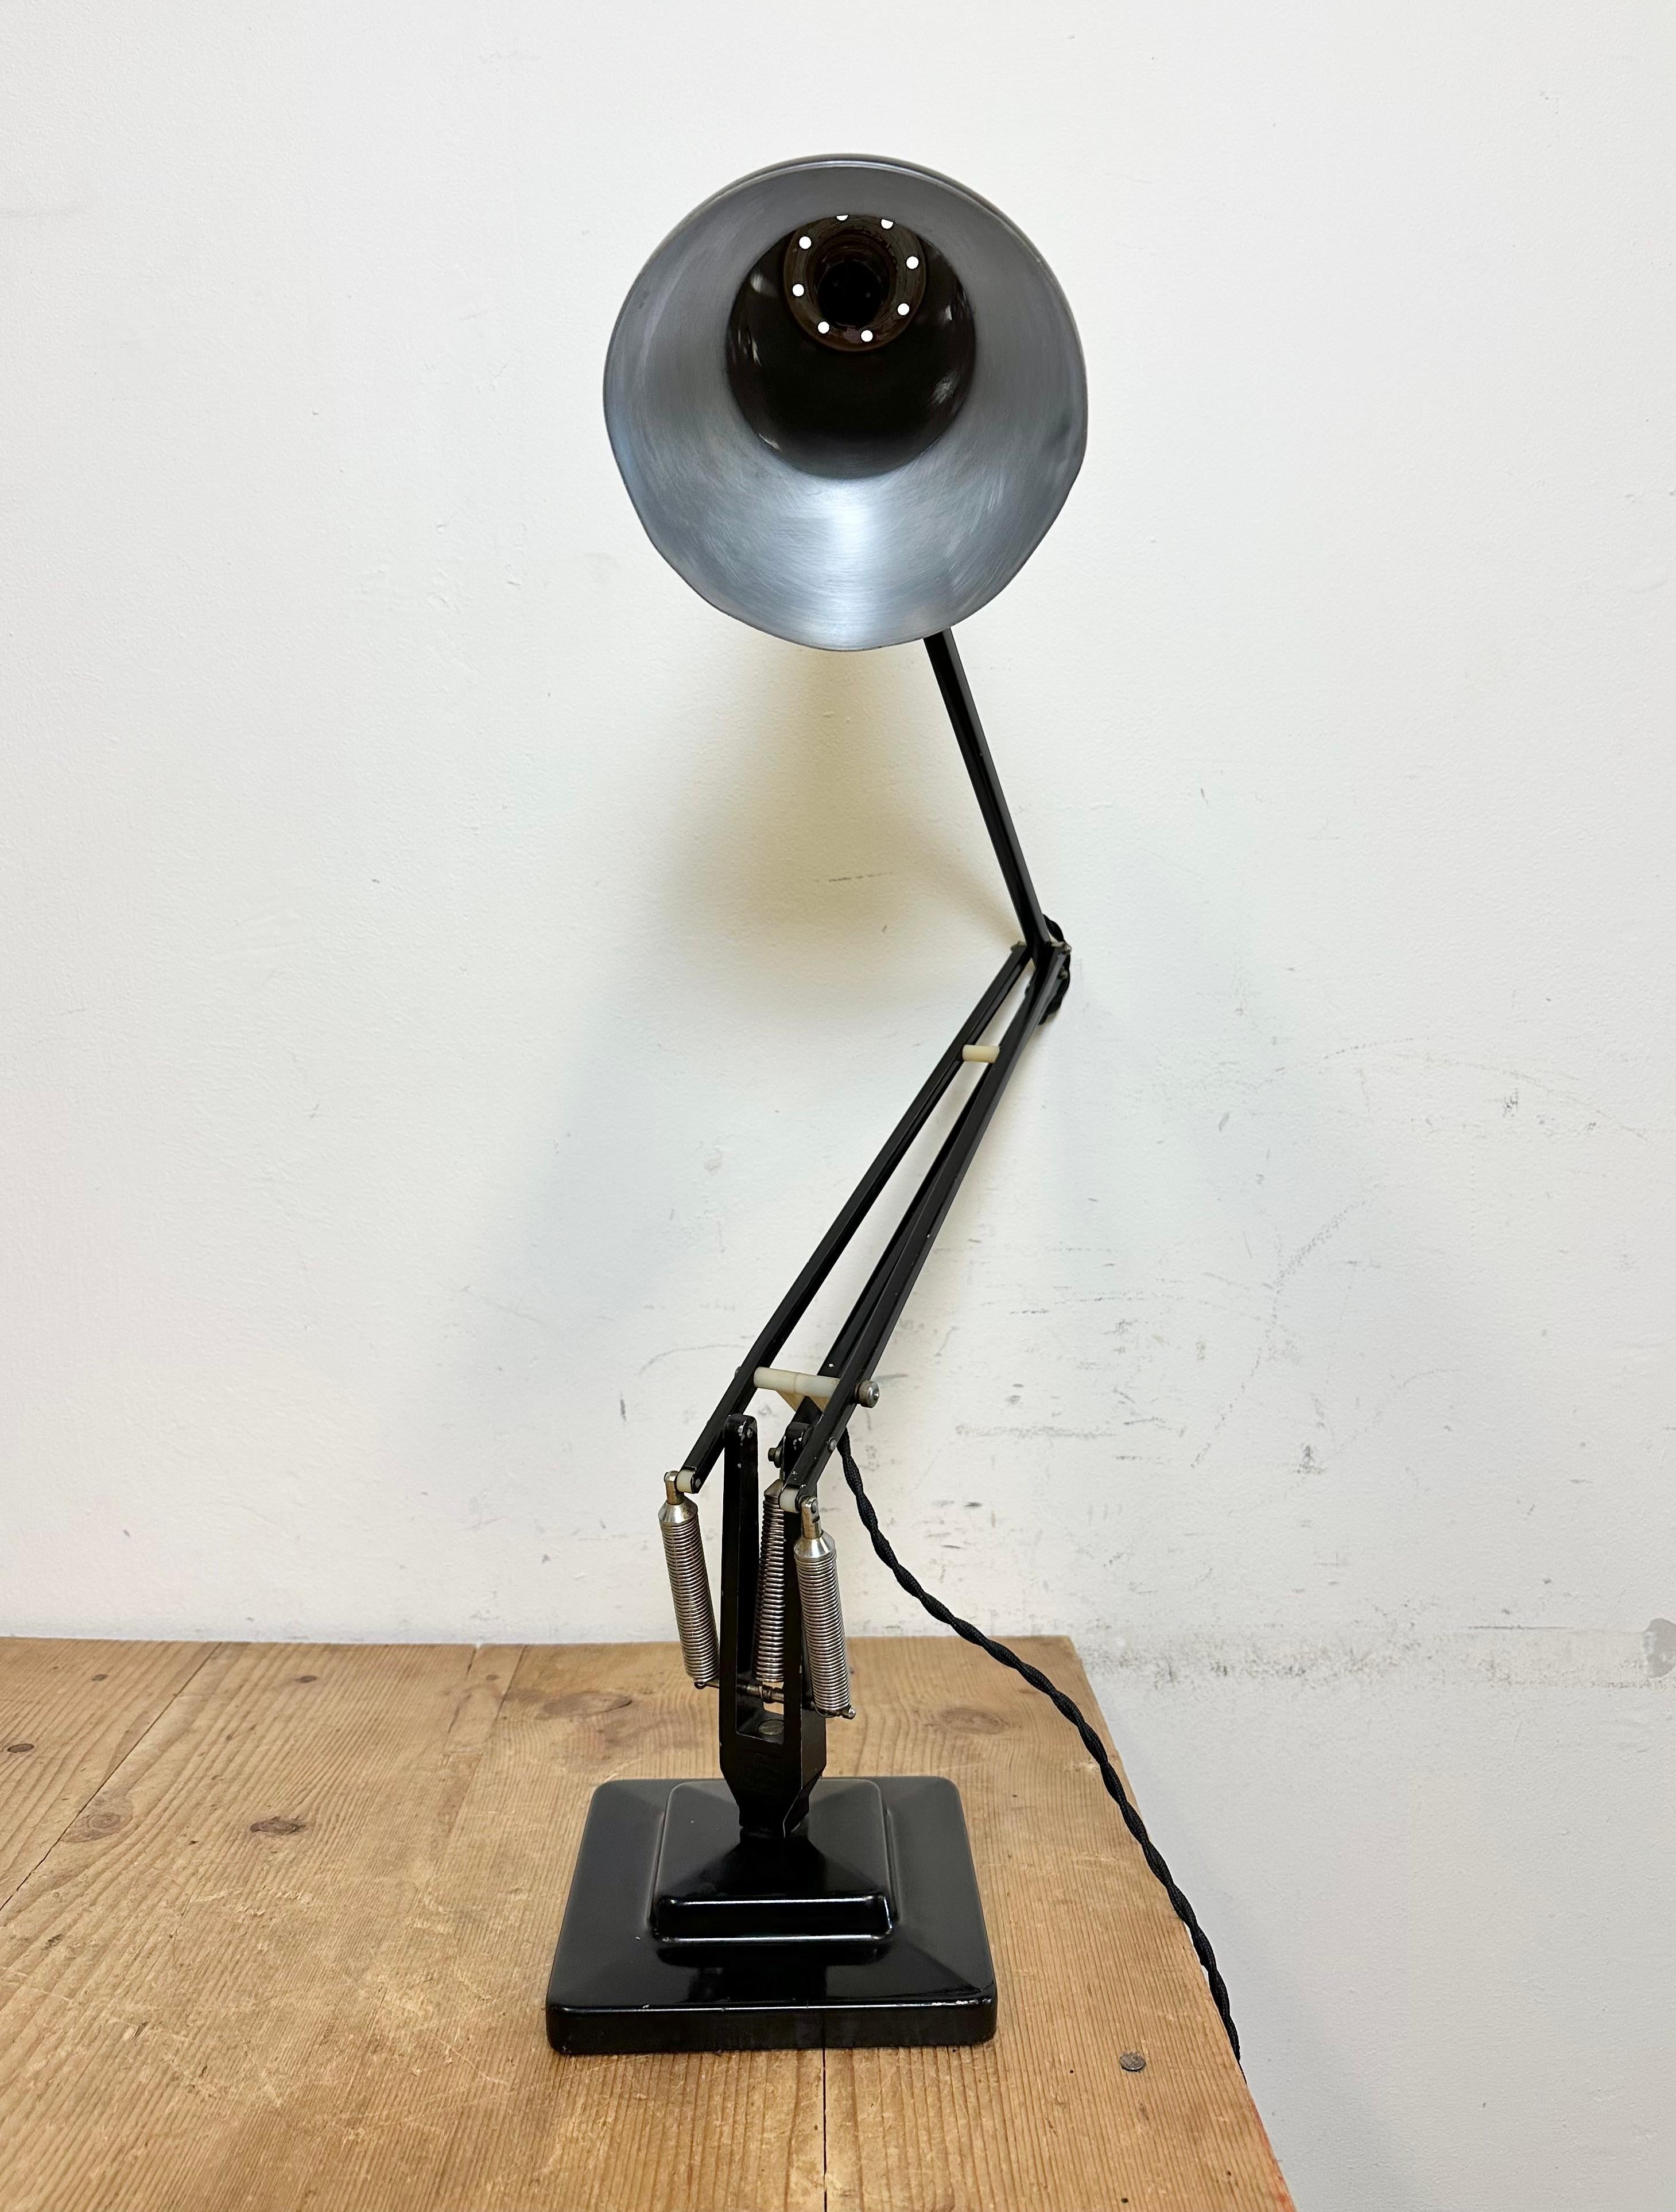 Aluminum Vintage Black Anglepoise Table Lamp from Herbert Terry & Sons, 1950s